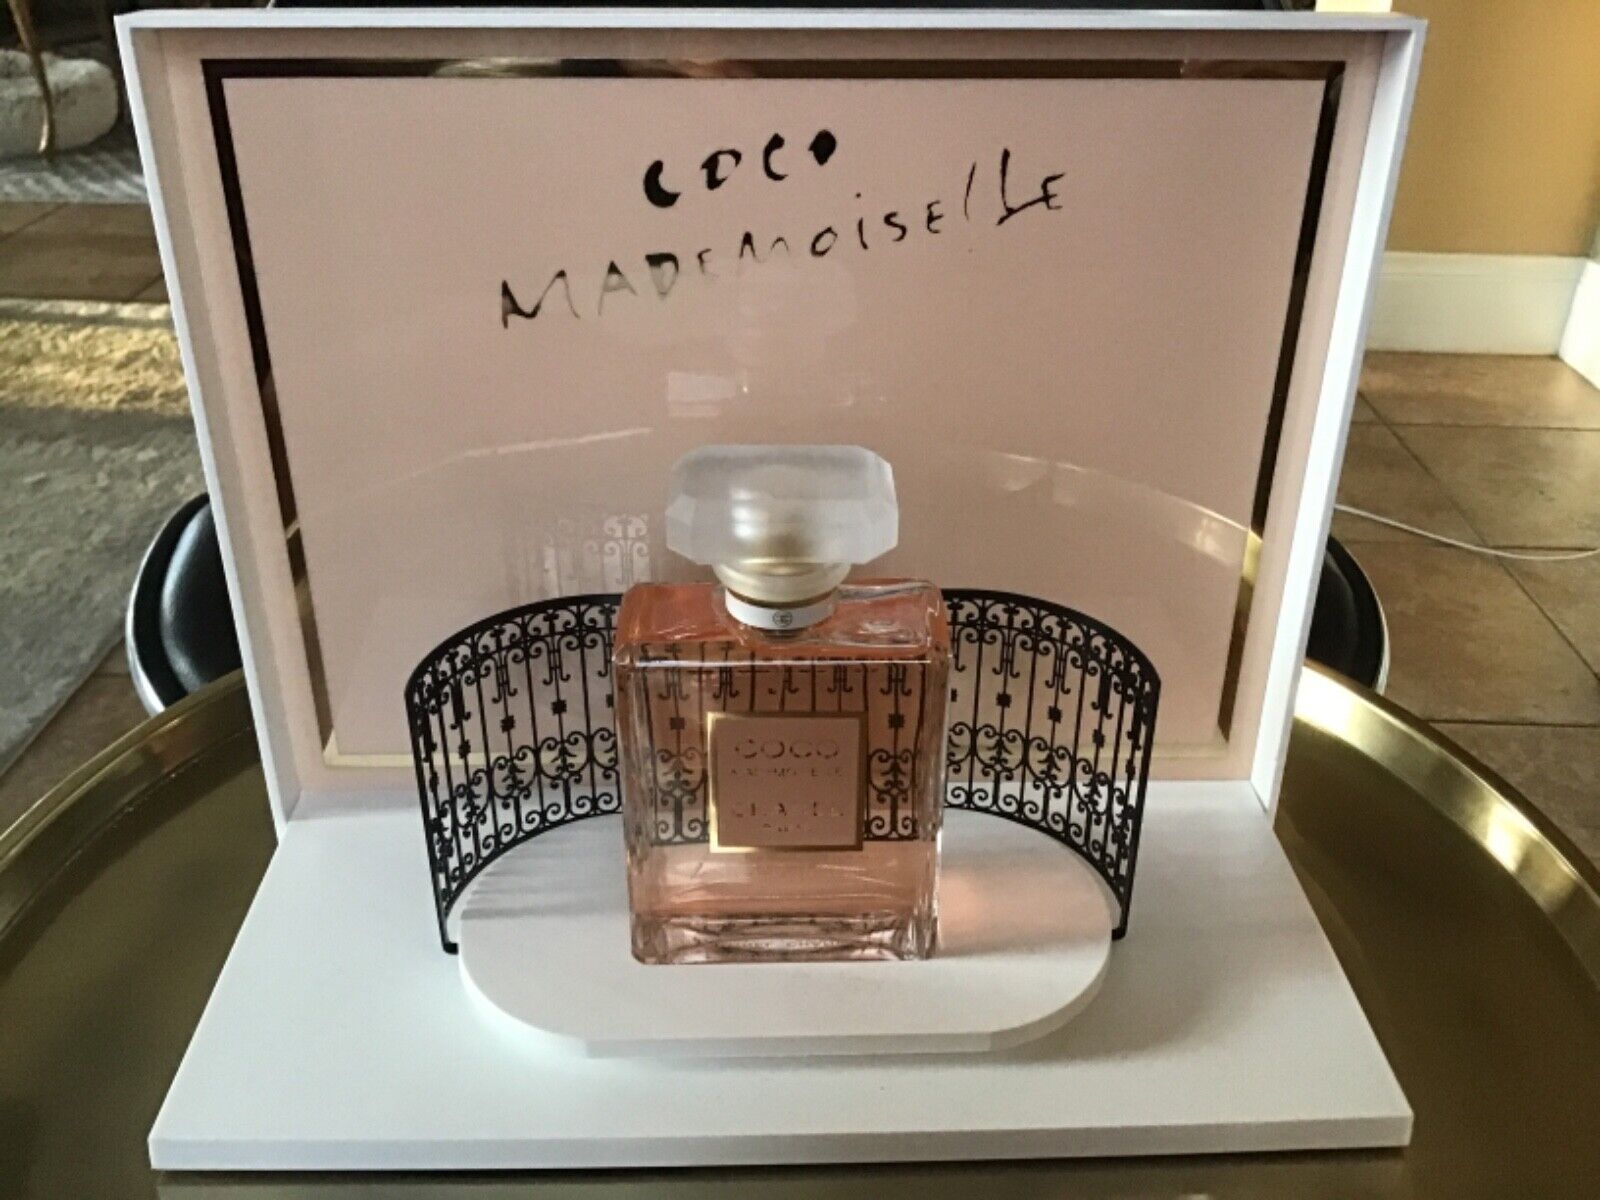 COCO MADEMOISELLE CHANEL Store Display parfum bottle just for Demonstration